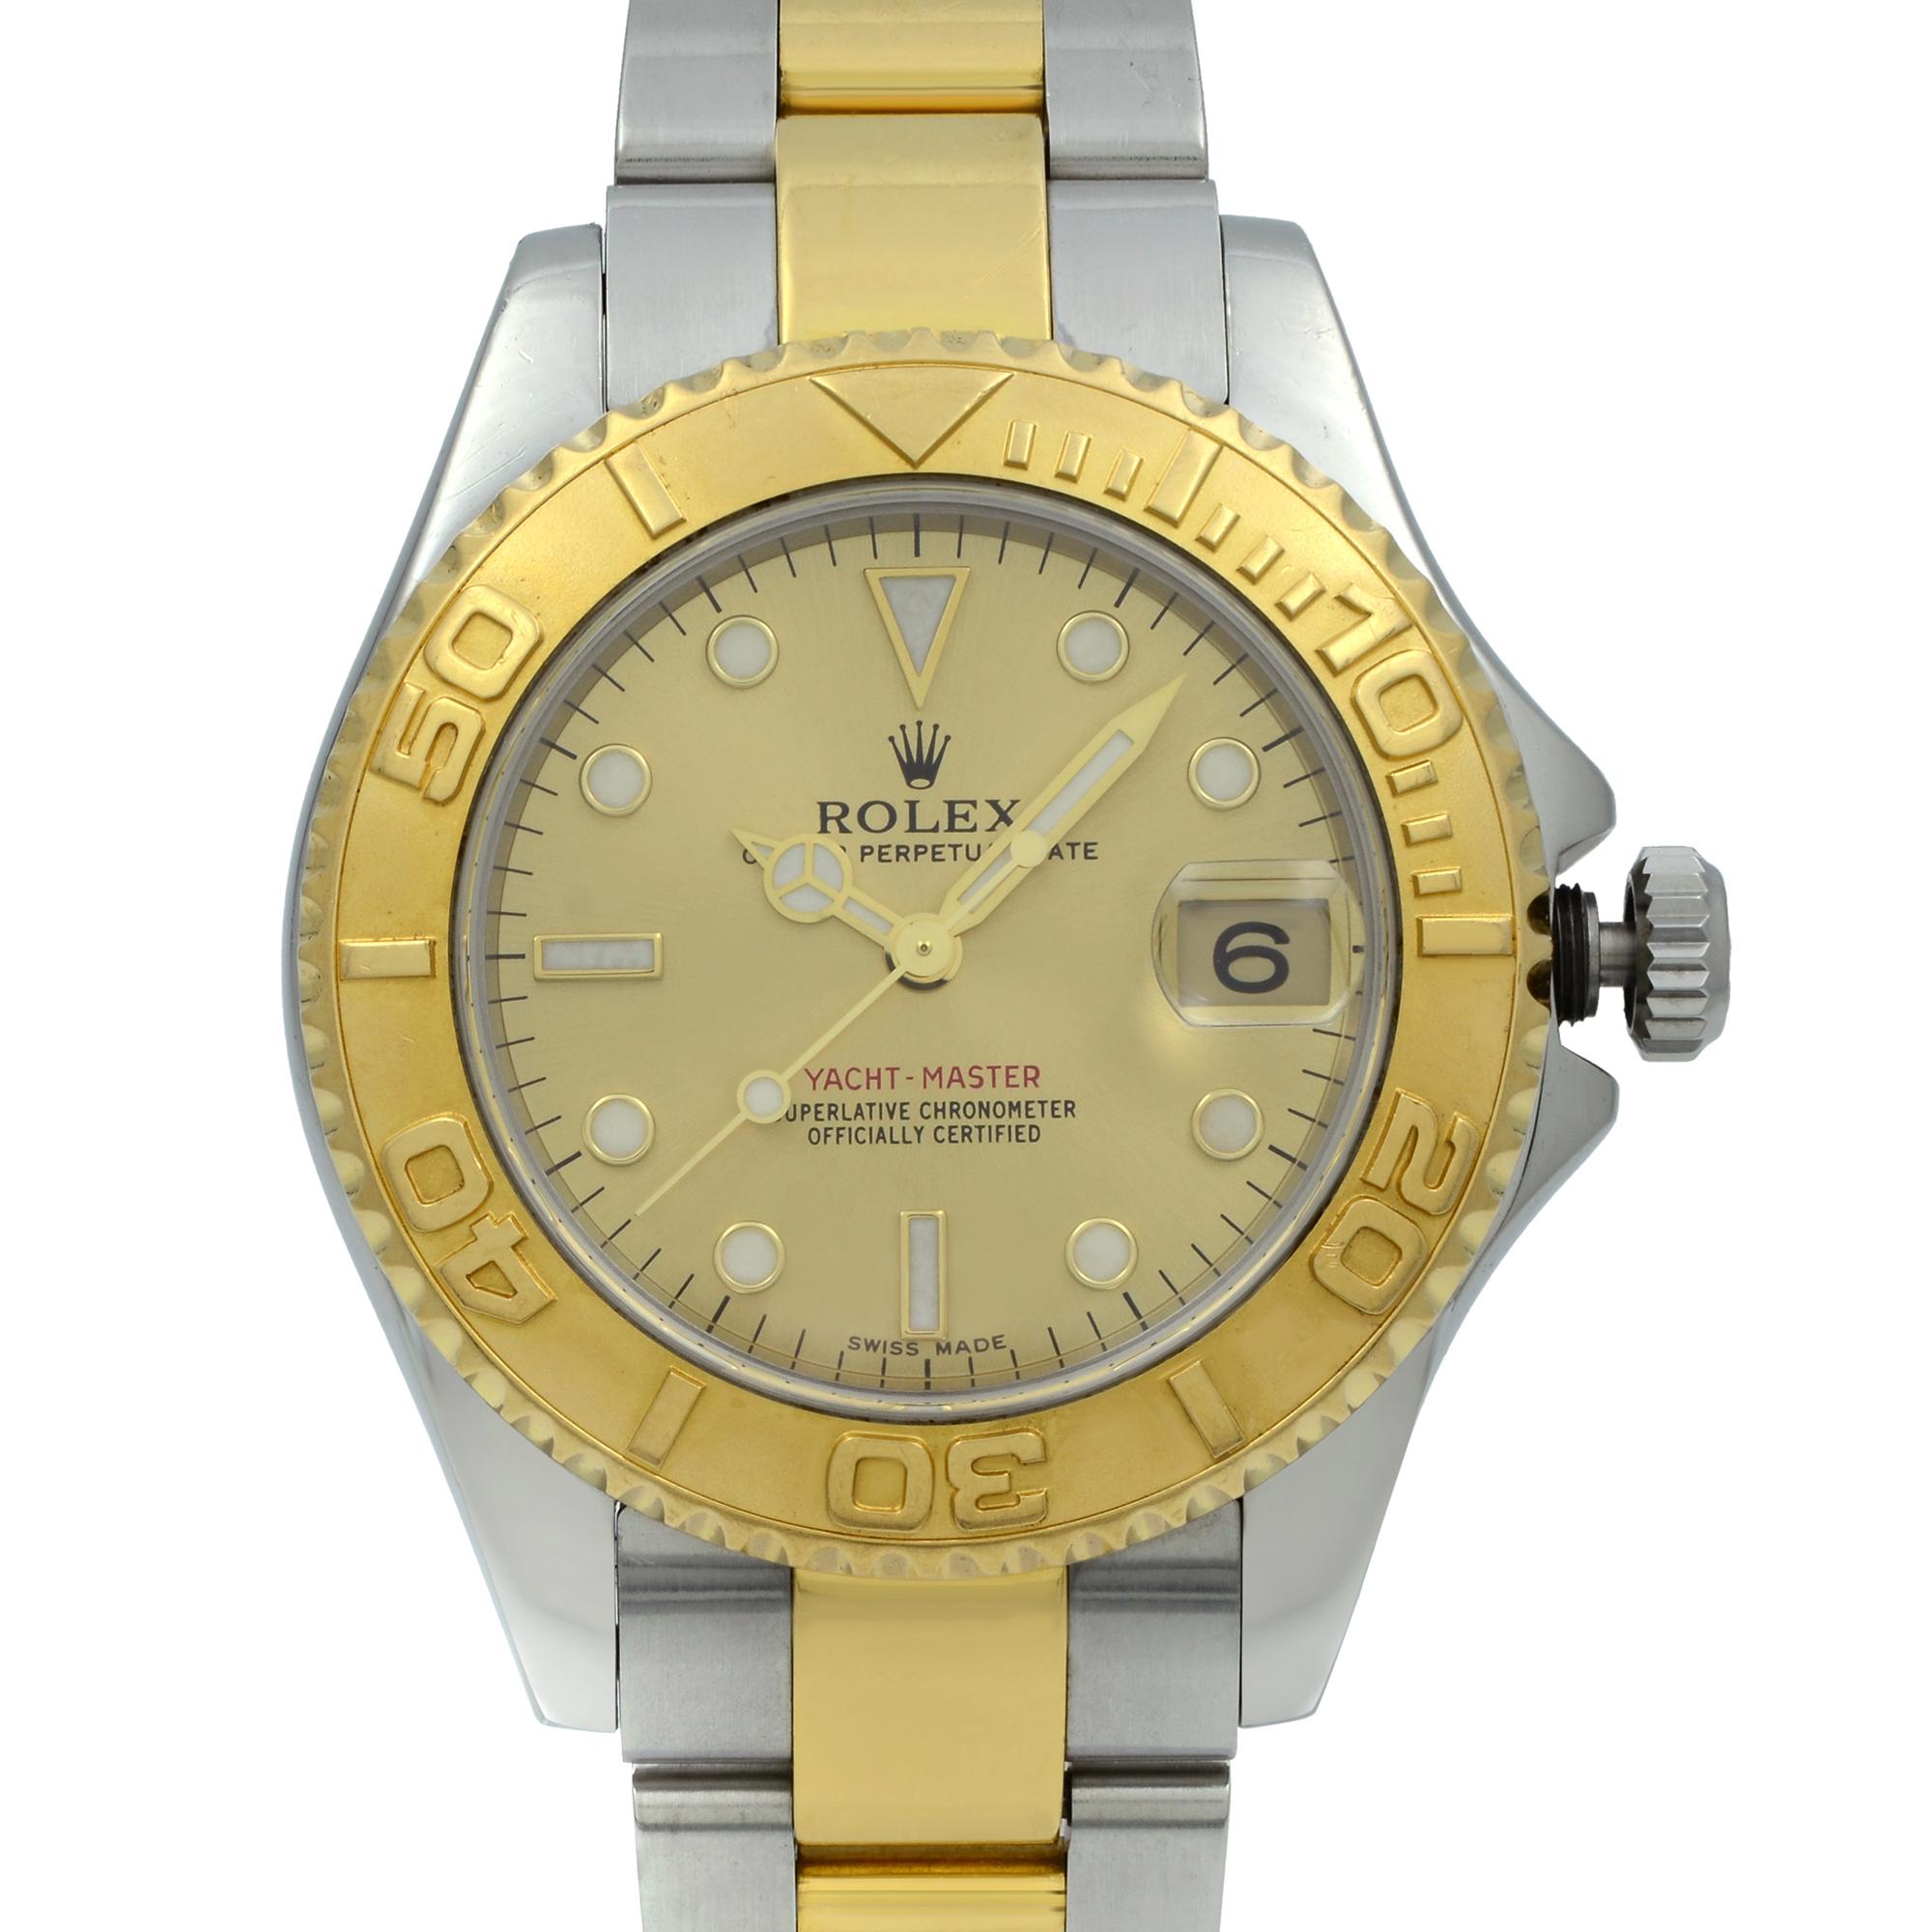 This watch is preowned with some tiny nick on sandblasted surface on bezel and with a minor slack on the bracelet. Original Box and Papers are included Covered by a one-year Chronostore warranty.
Details:
Brand Rolex
Department Unisex Adult
Model